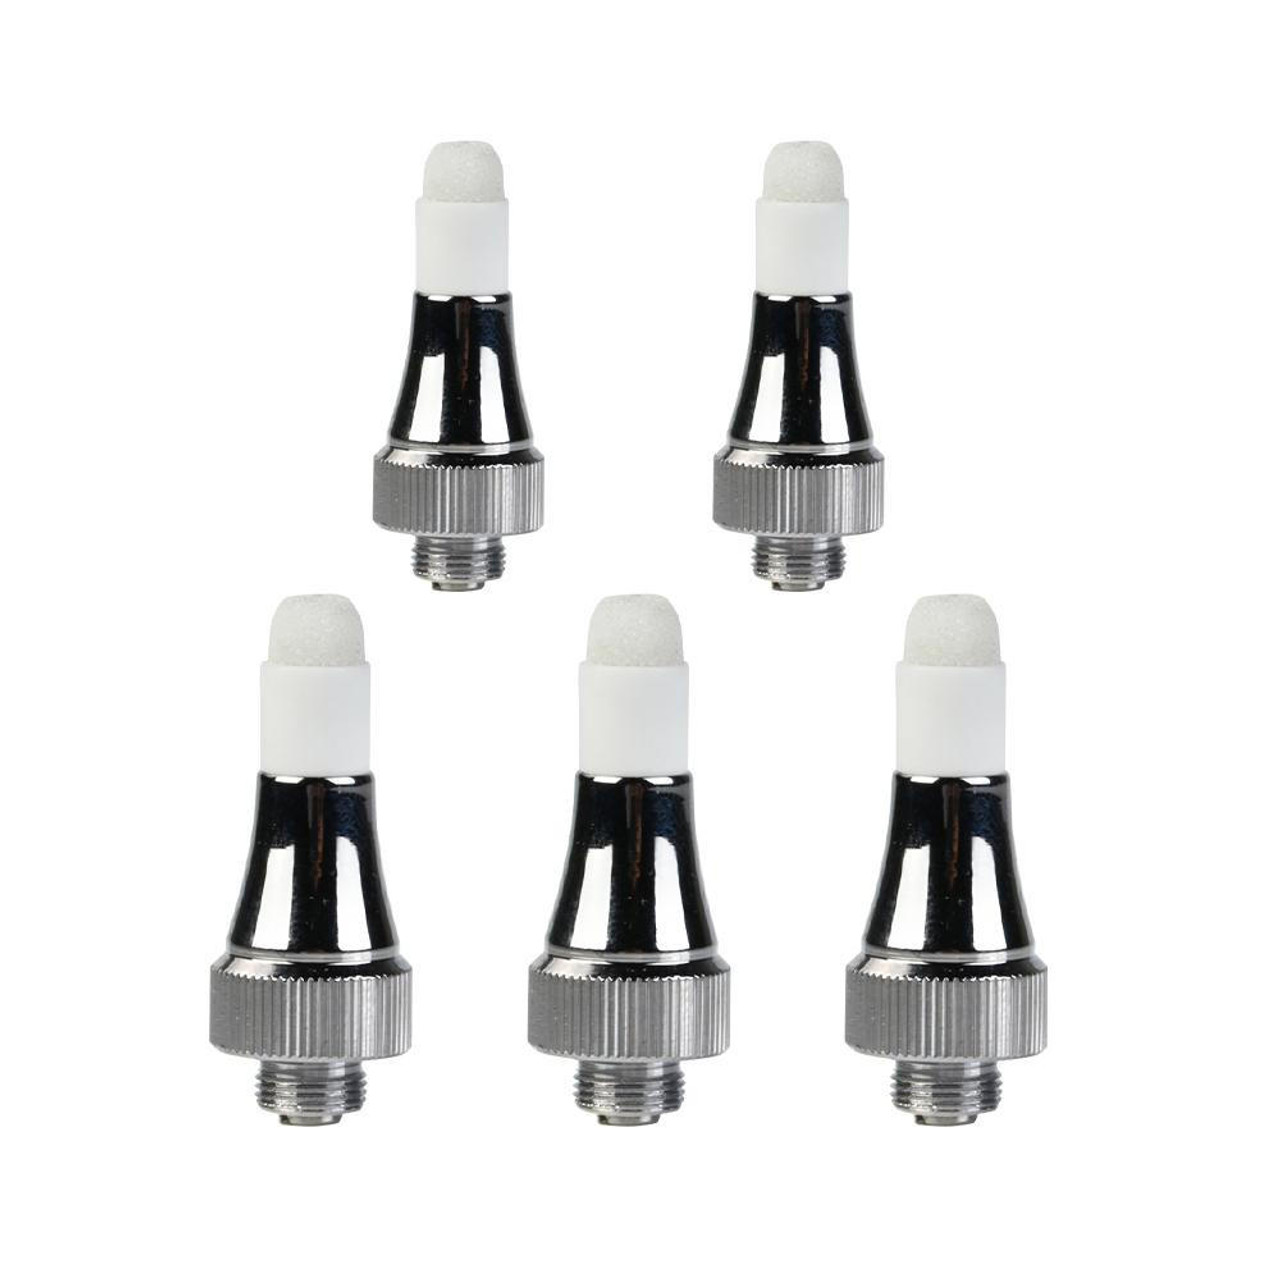 Ceramic 18mm Tip for Nectar Collector - Puffr